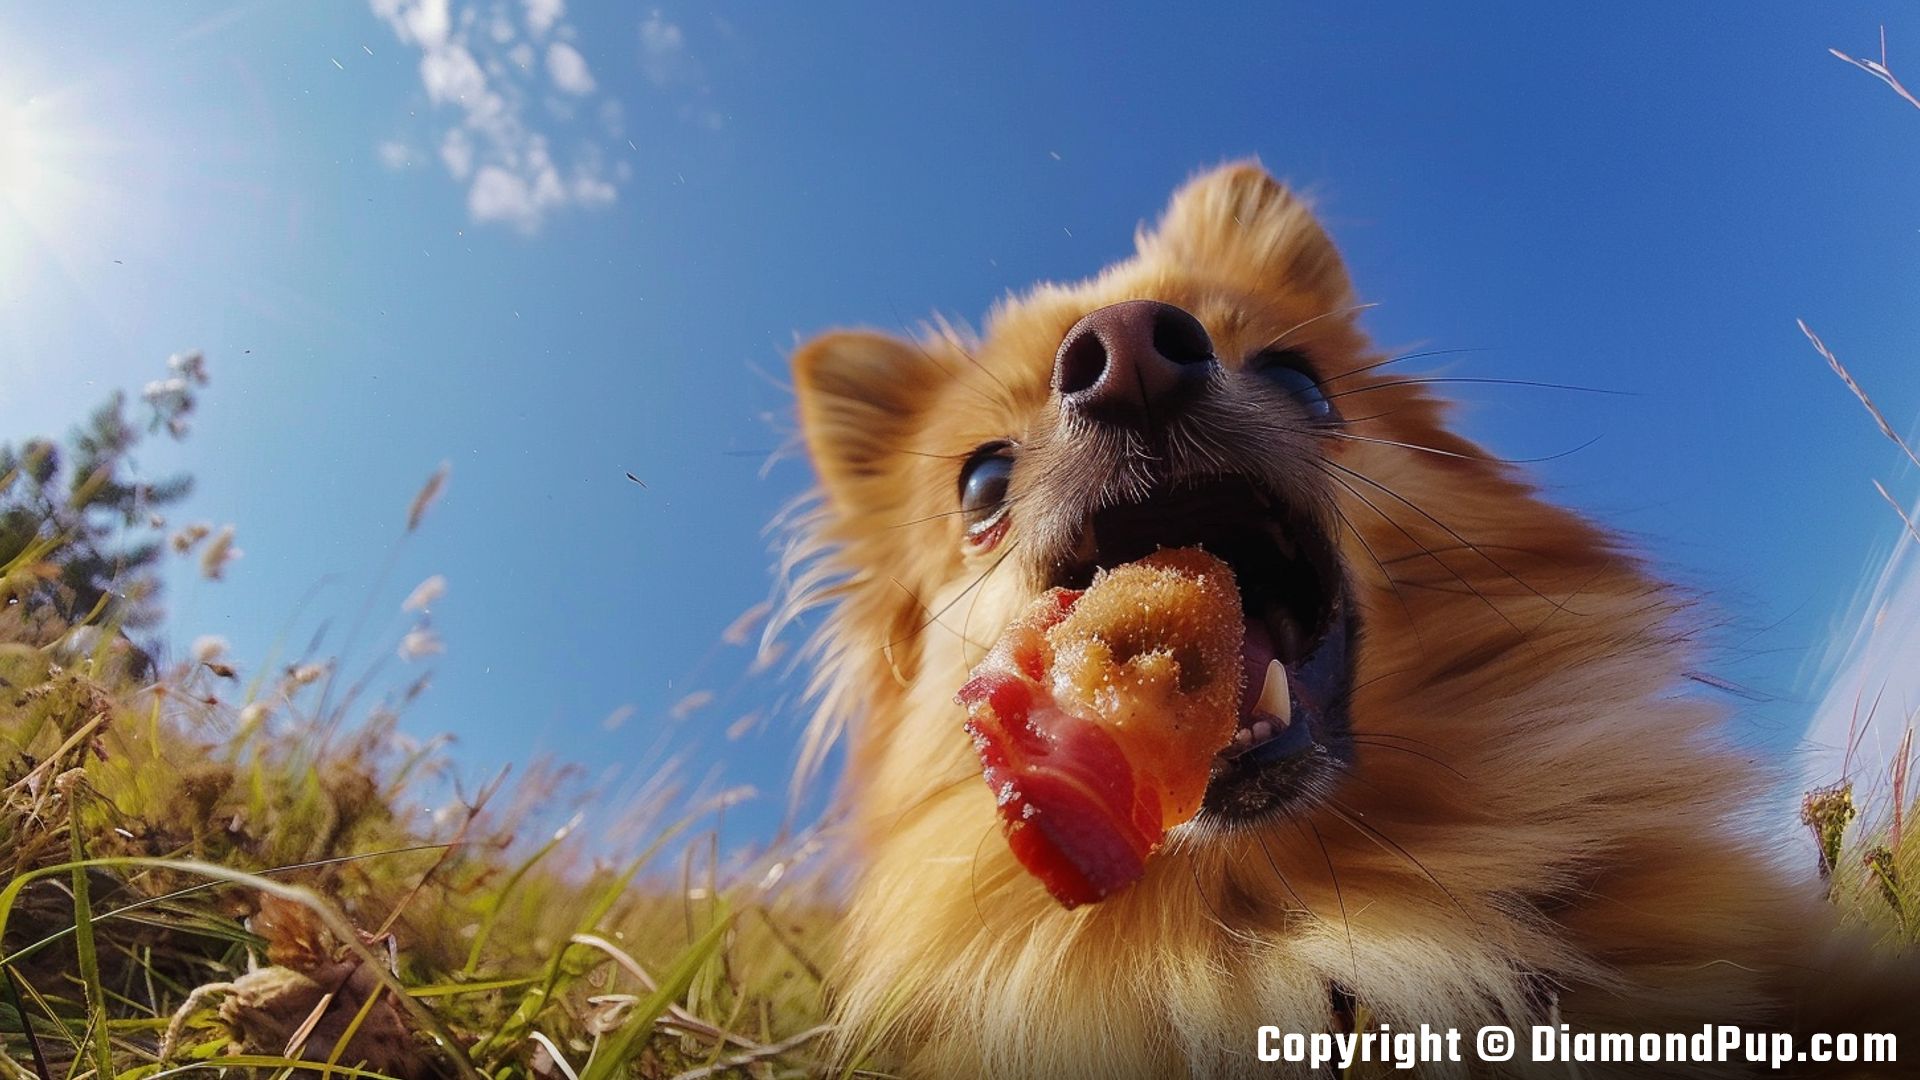 Image of a Playful Pomeranian Snacking on Bacon